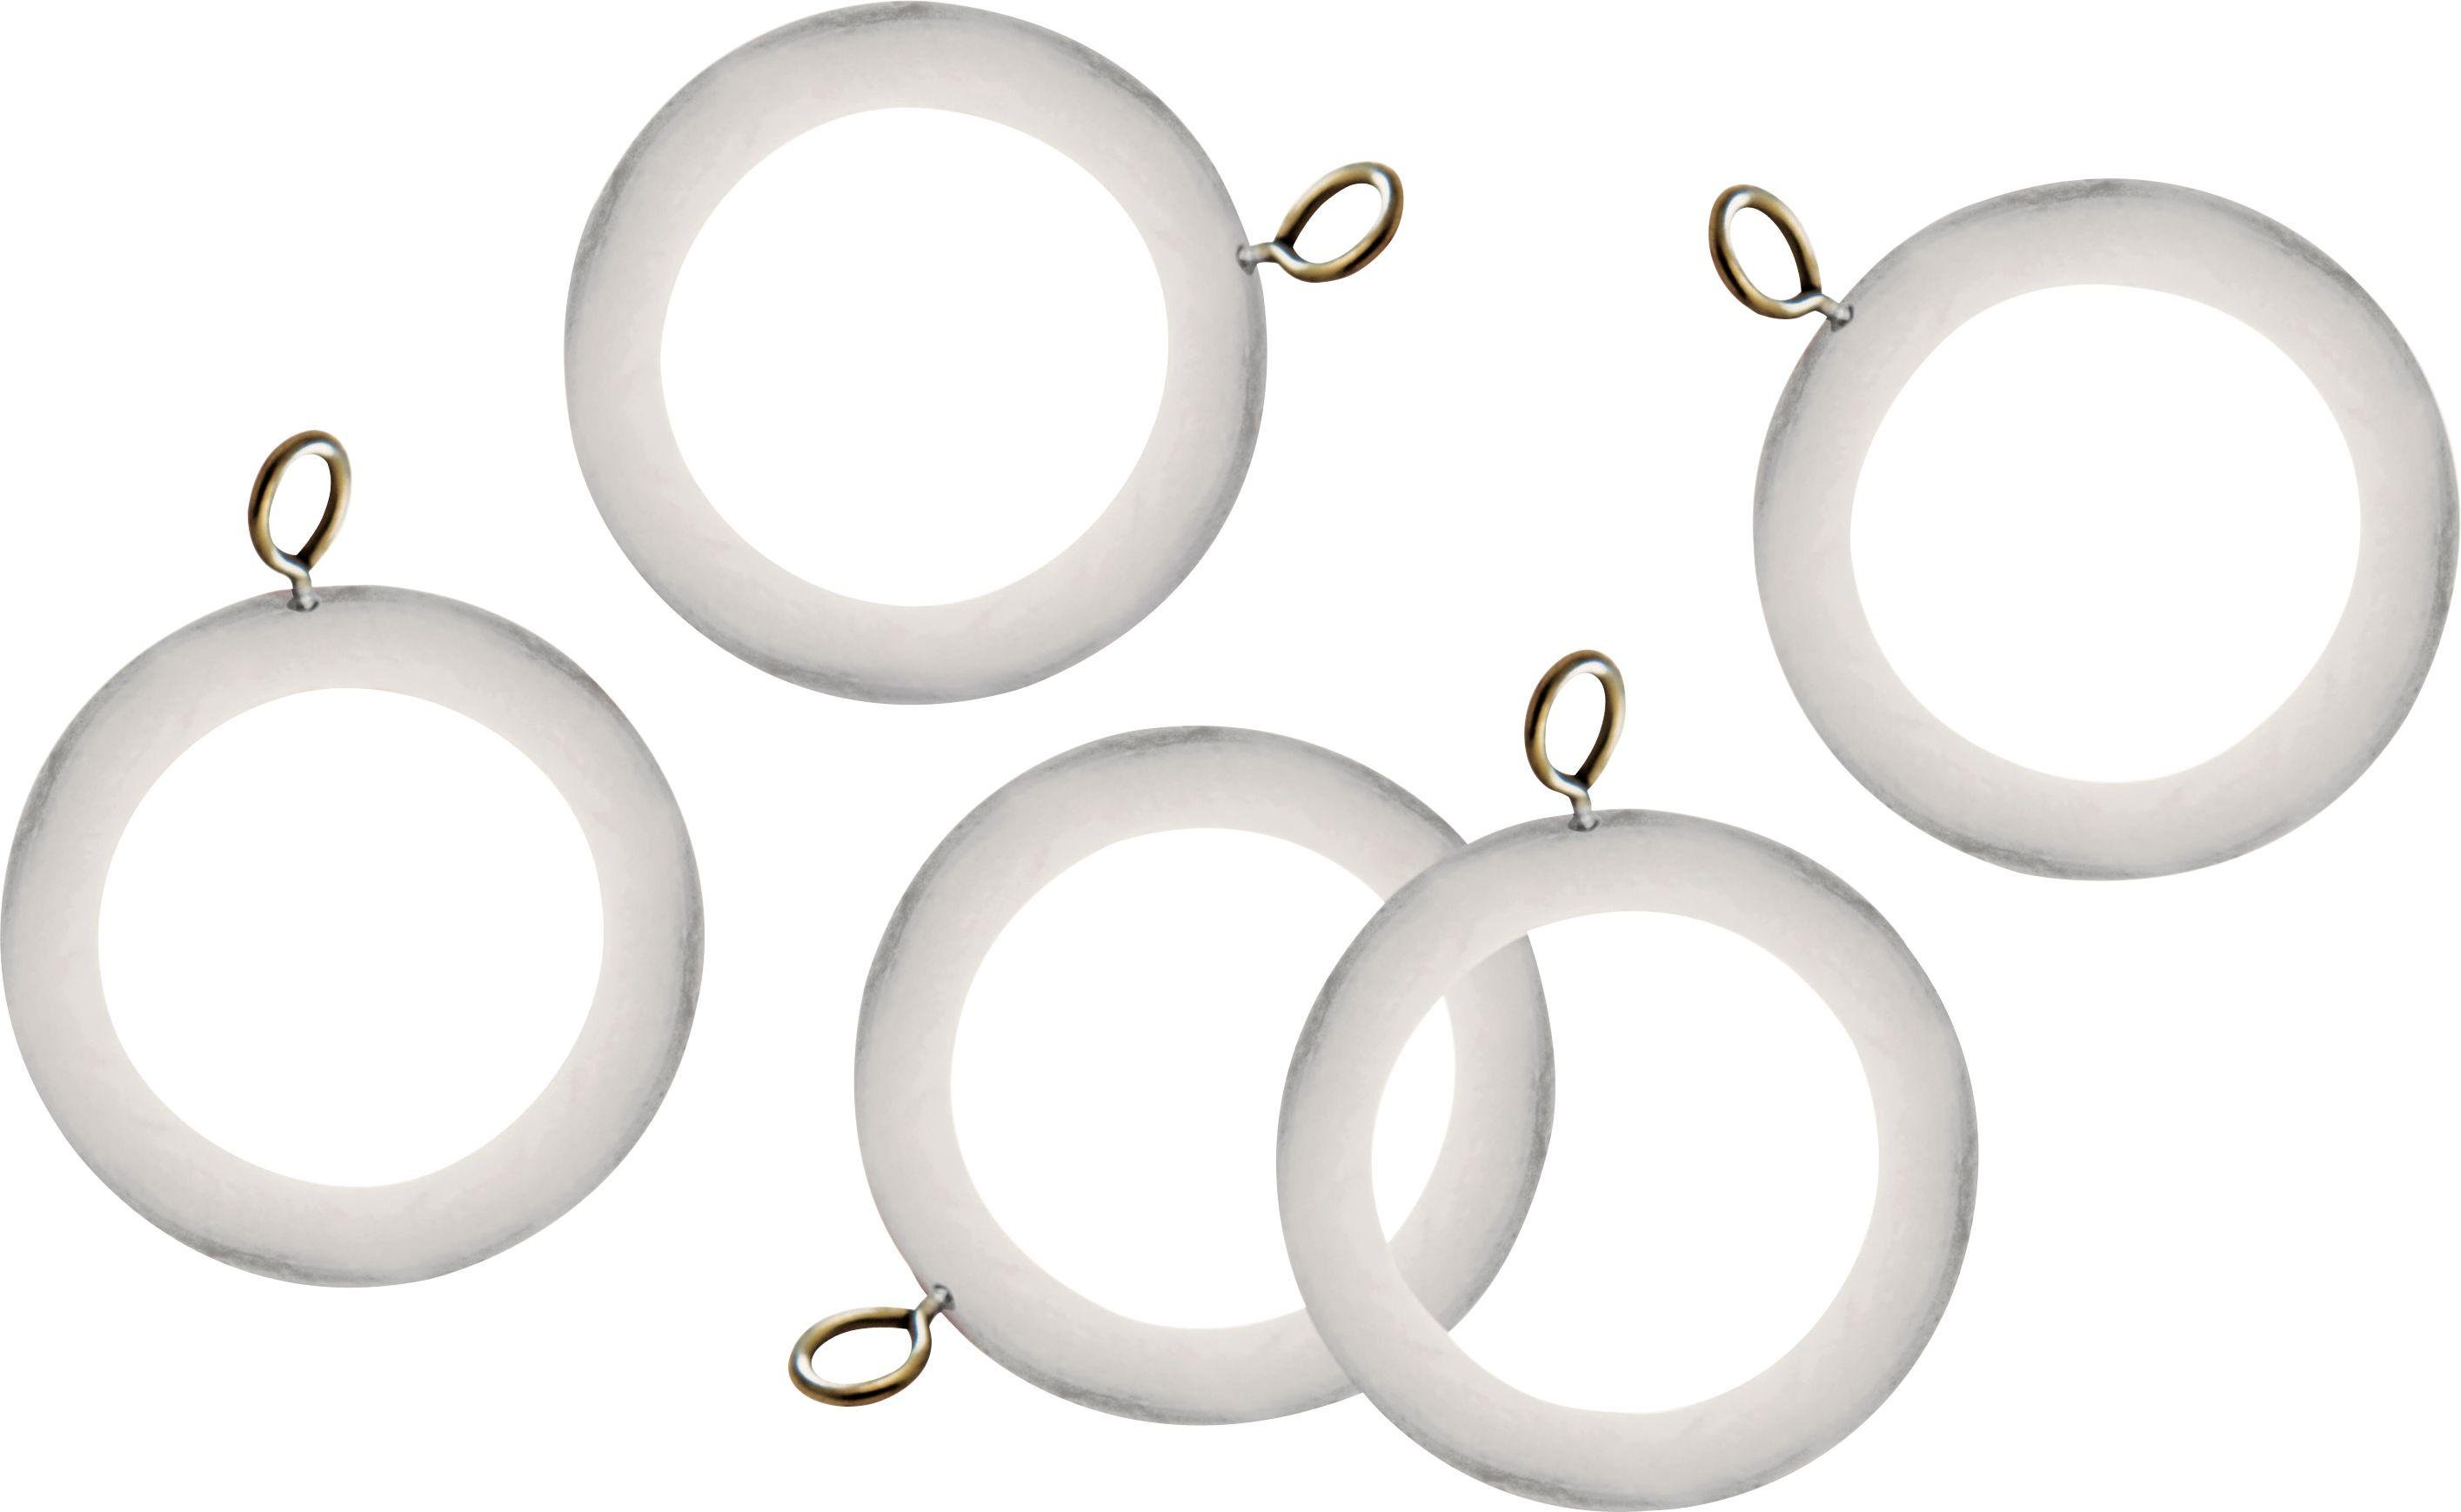 Argos Home Set of 20 Wooden 23mm Curtain Rings review